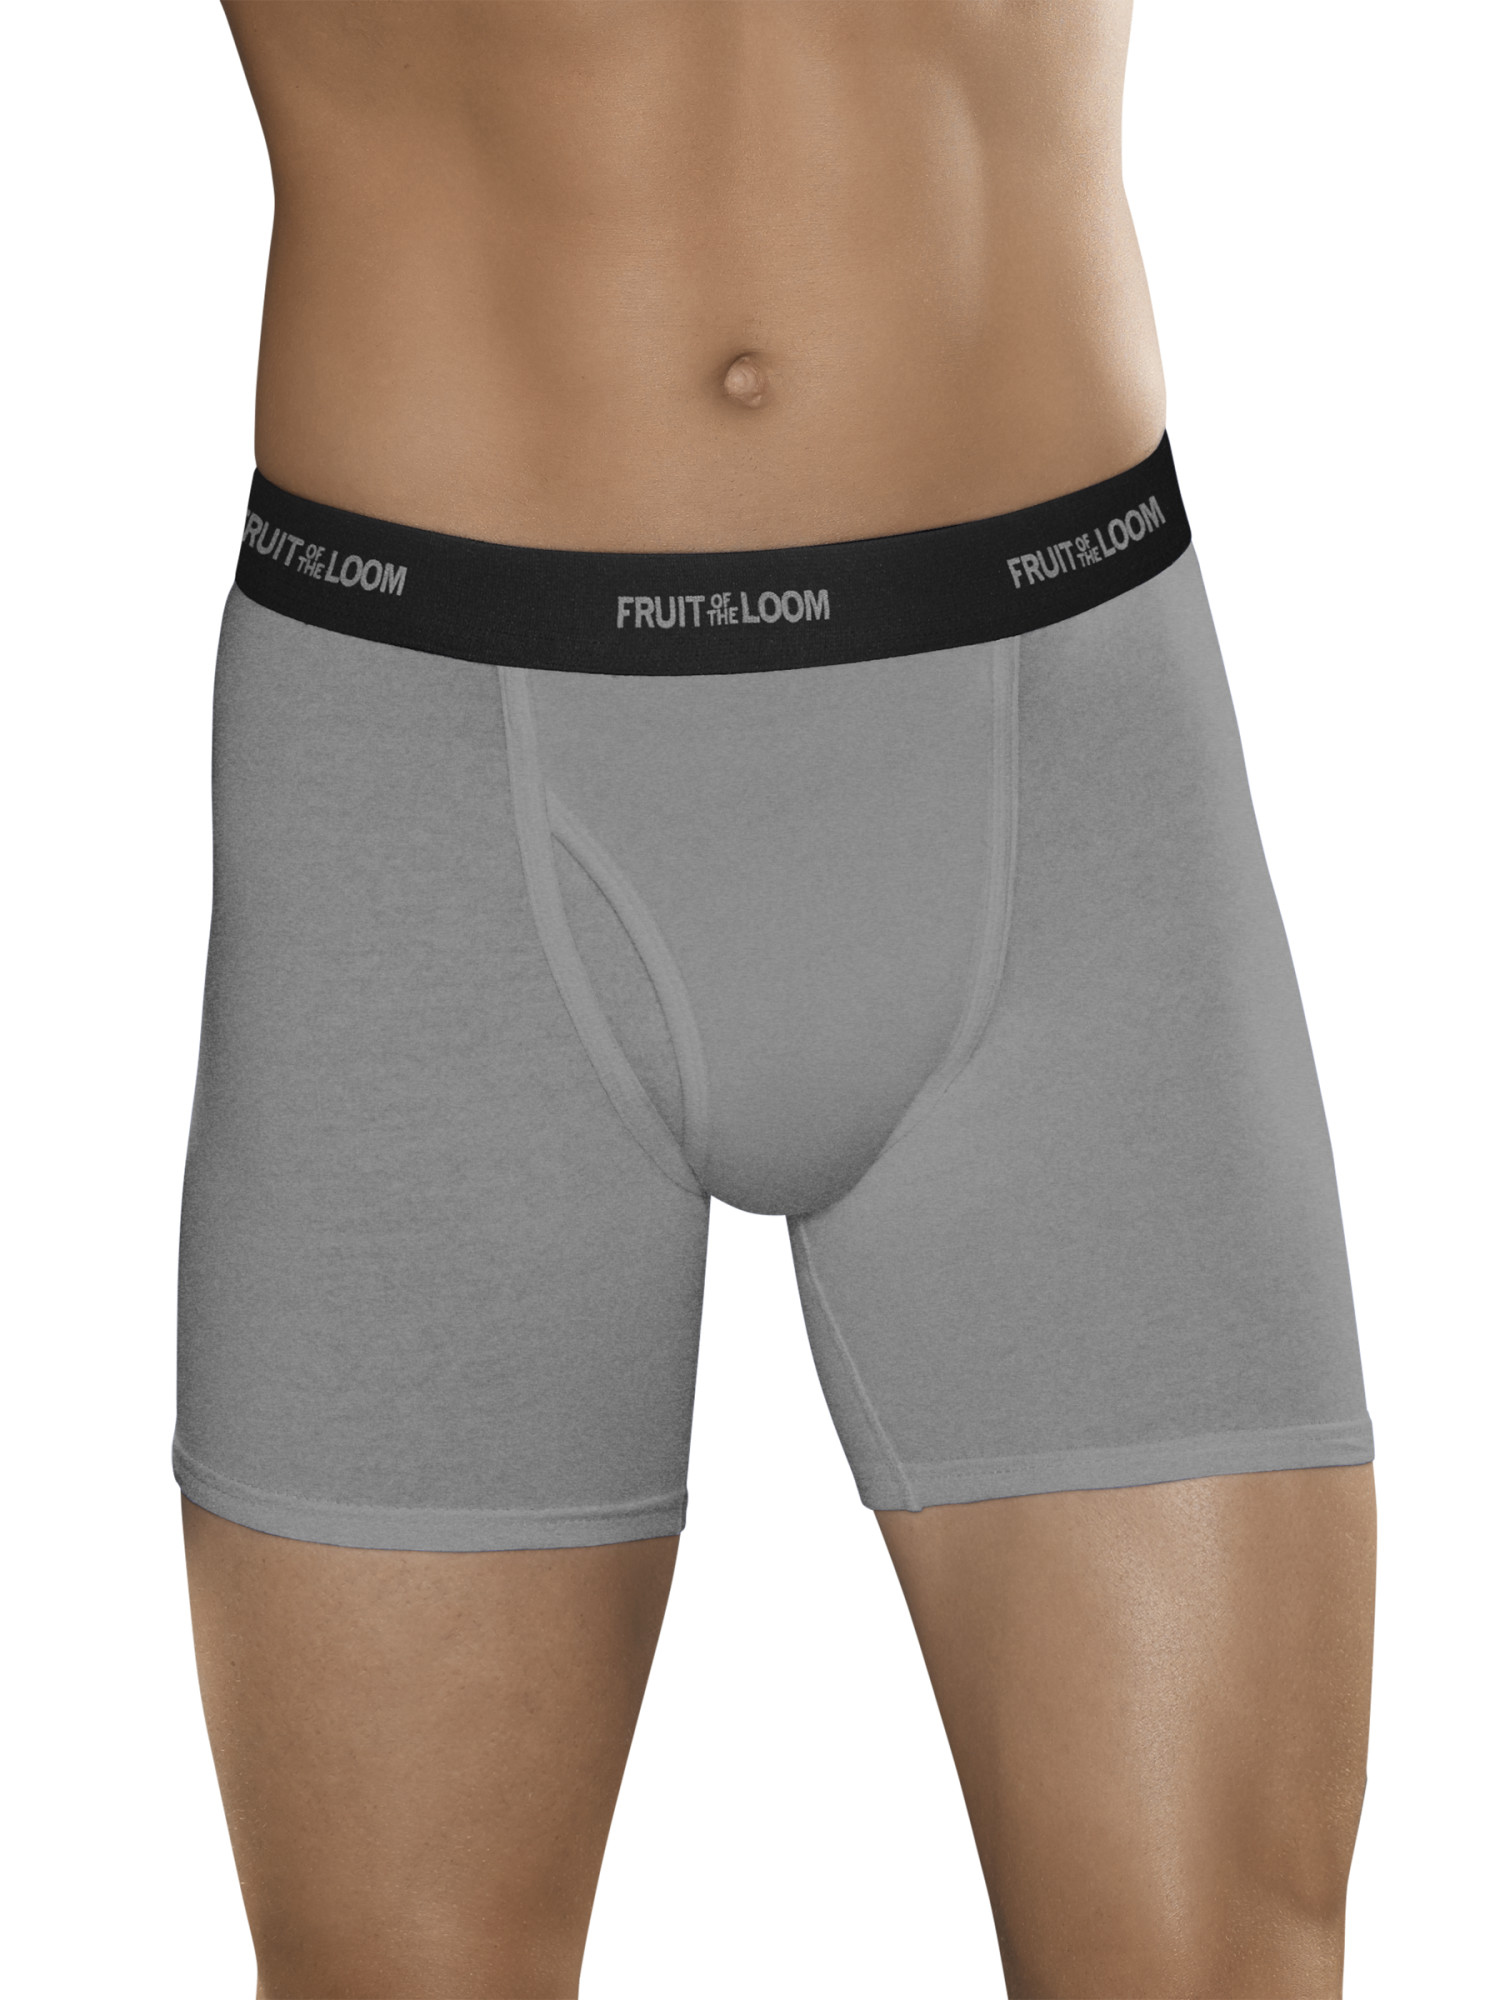 Fruit of the Loom Men's Beyondsoft Black and Gray Boxer Briefs, 5 Pack - image 4 of 5